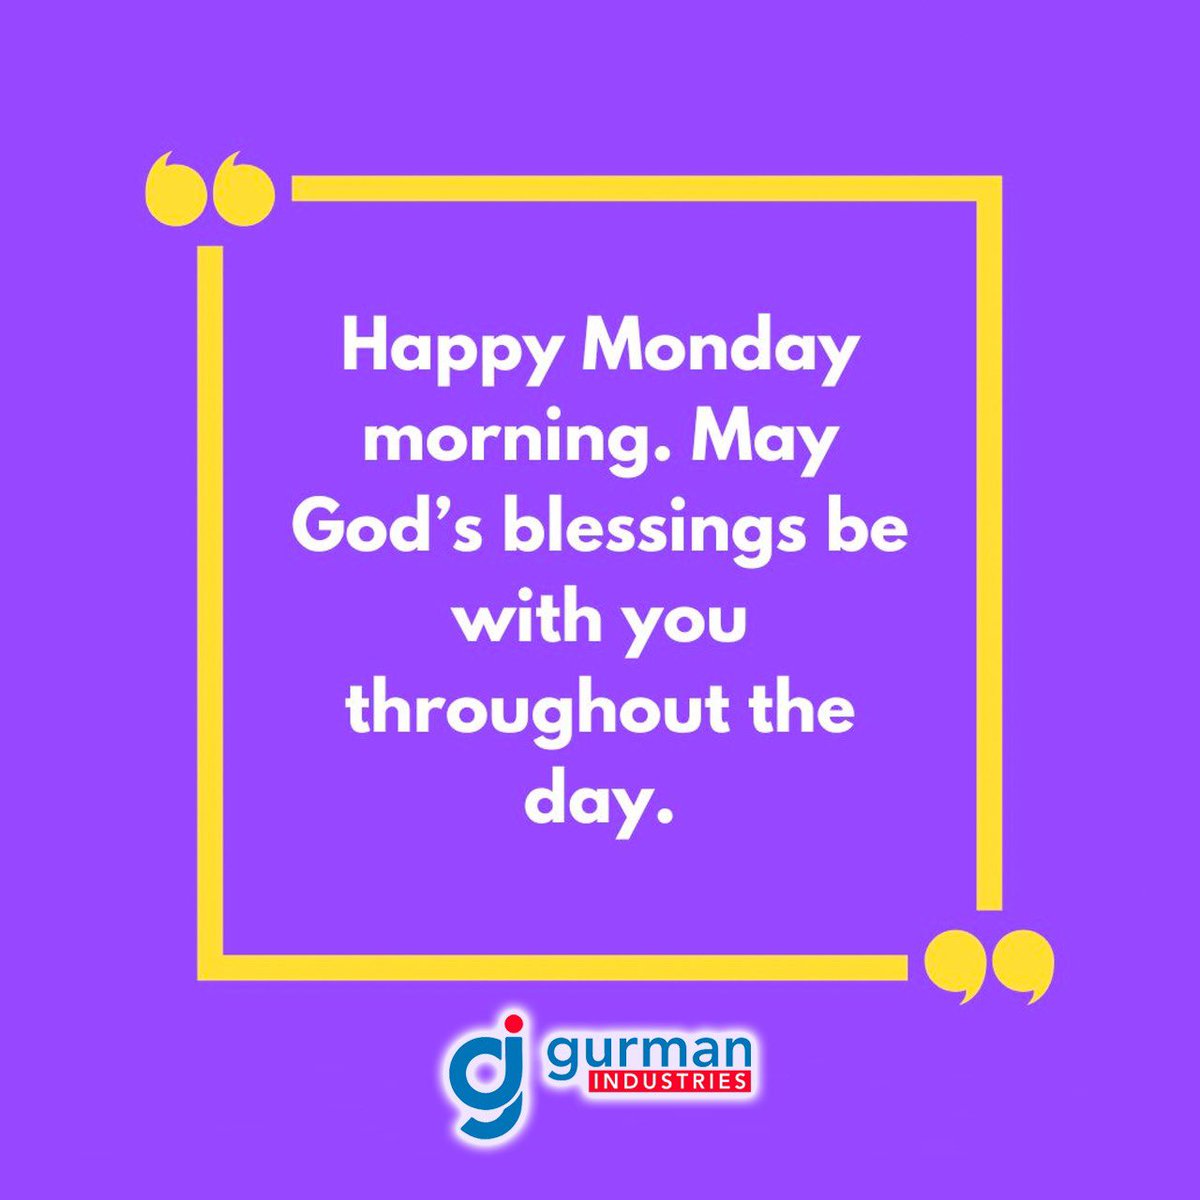 #Happy #Monday #Morning #May #God's #blessings be with you #throughout the #day #GurmanIndustries